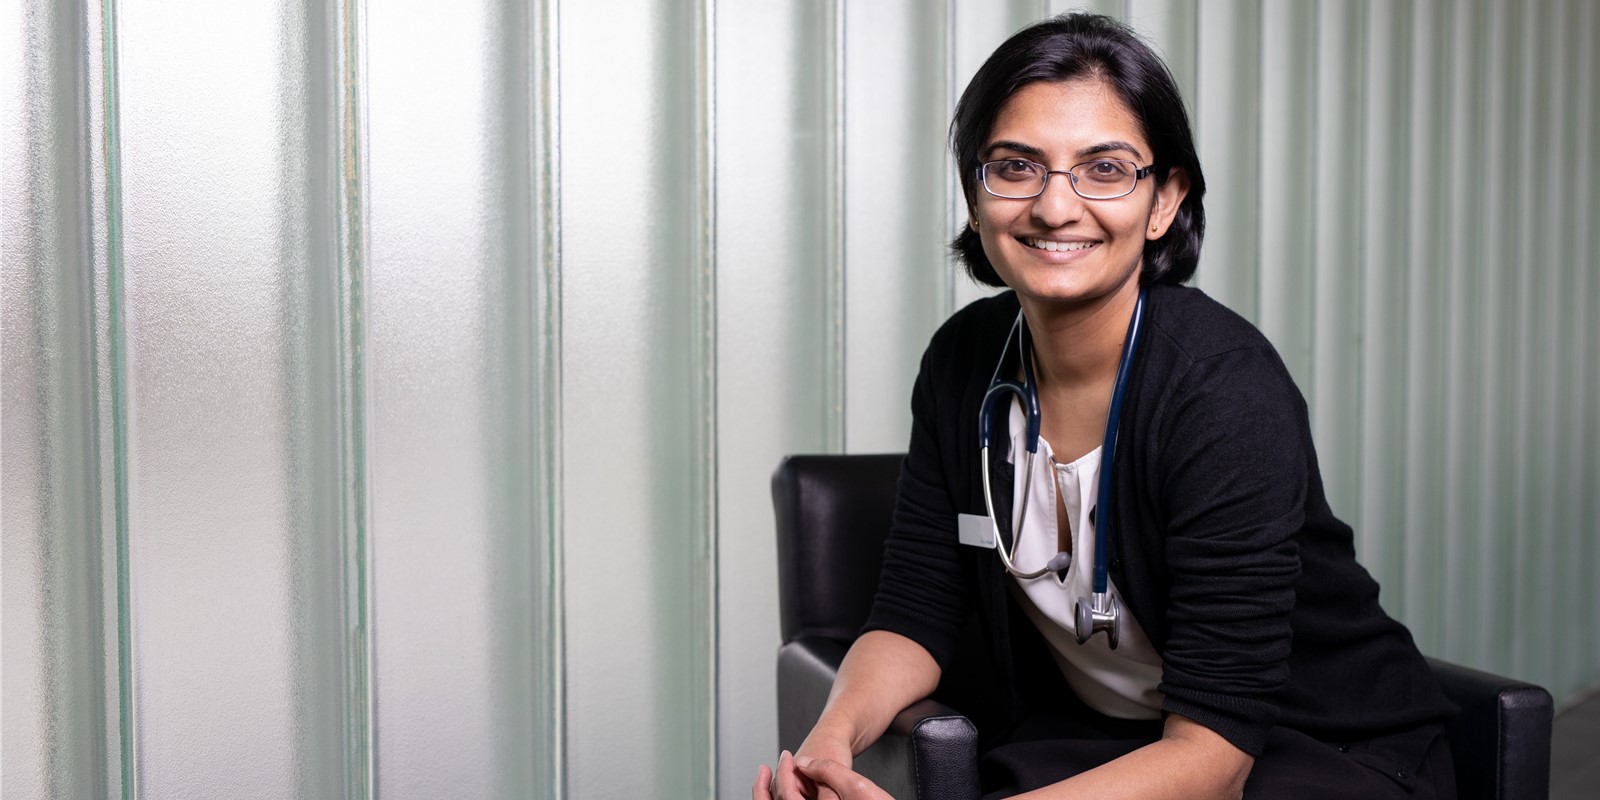 Dr Sumitha Bhaskaran, Head of General Medicine Monash Medical Centre sits on a chair, smiling with her hands clasped together.